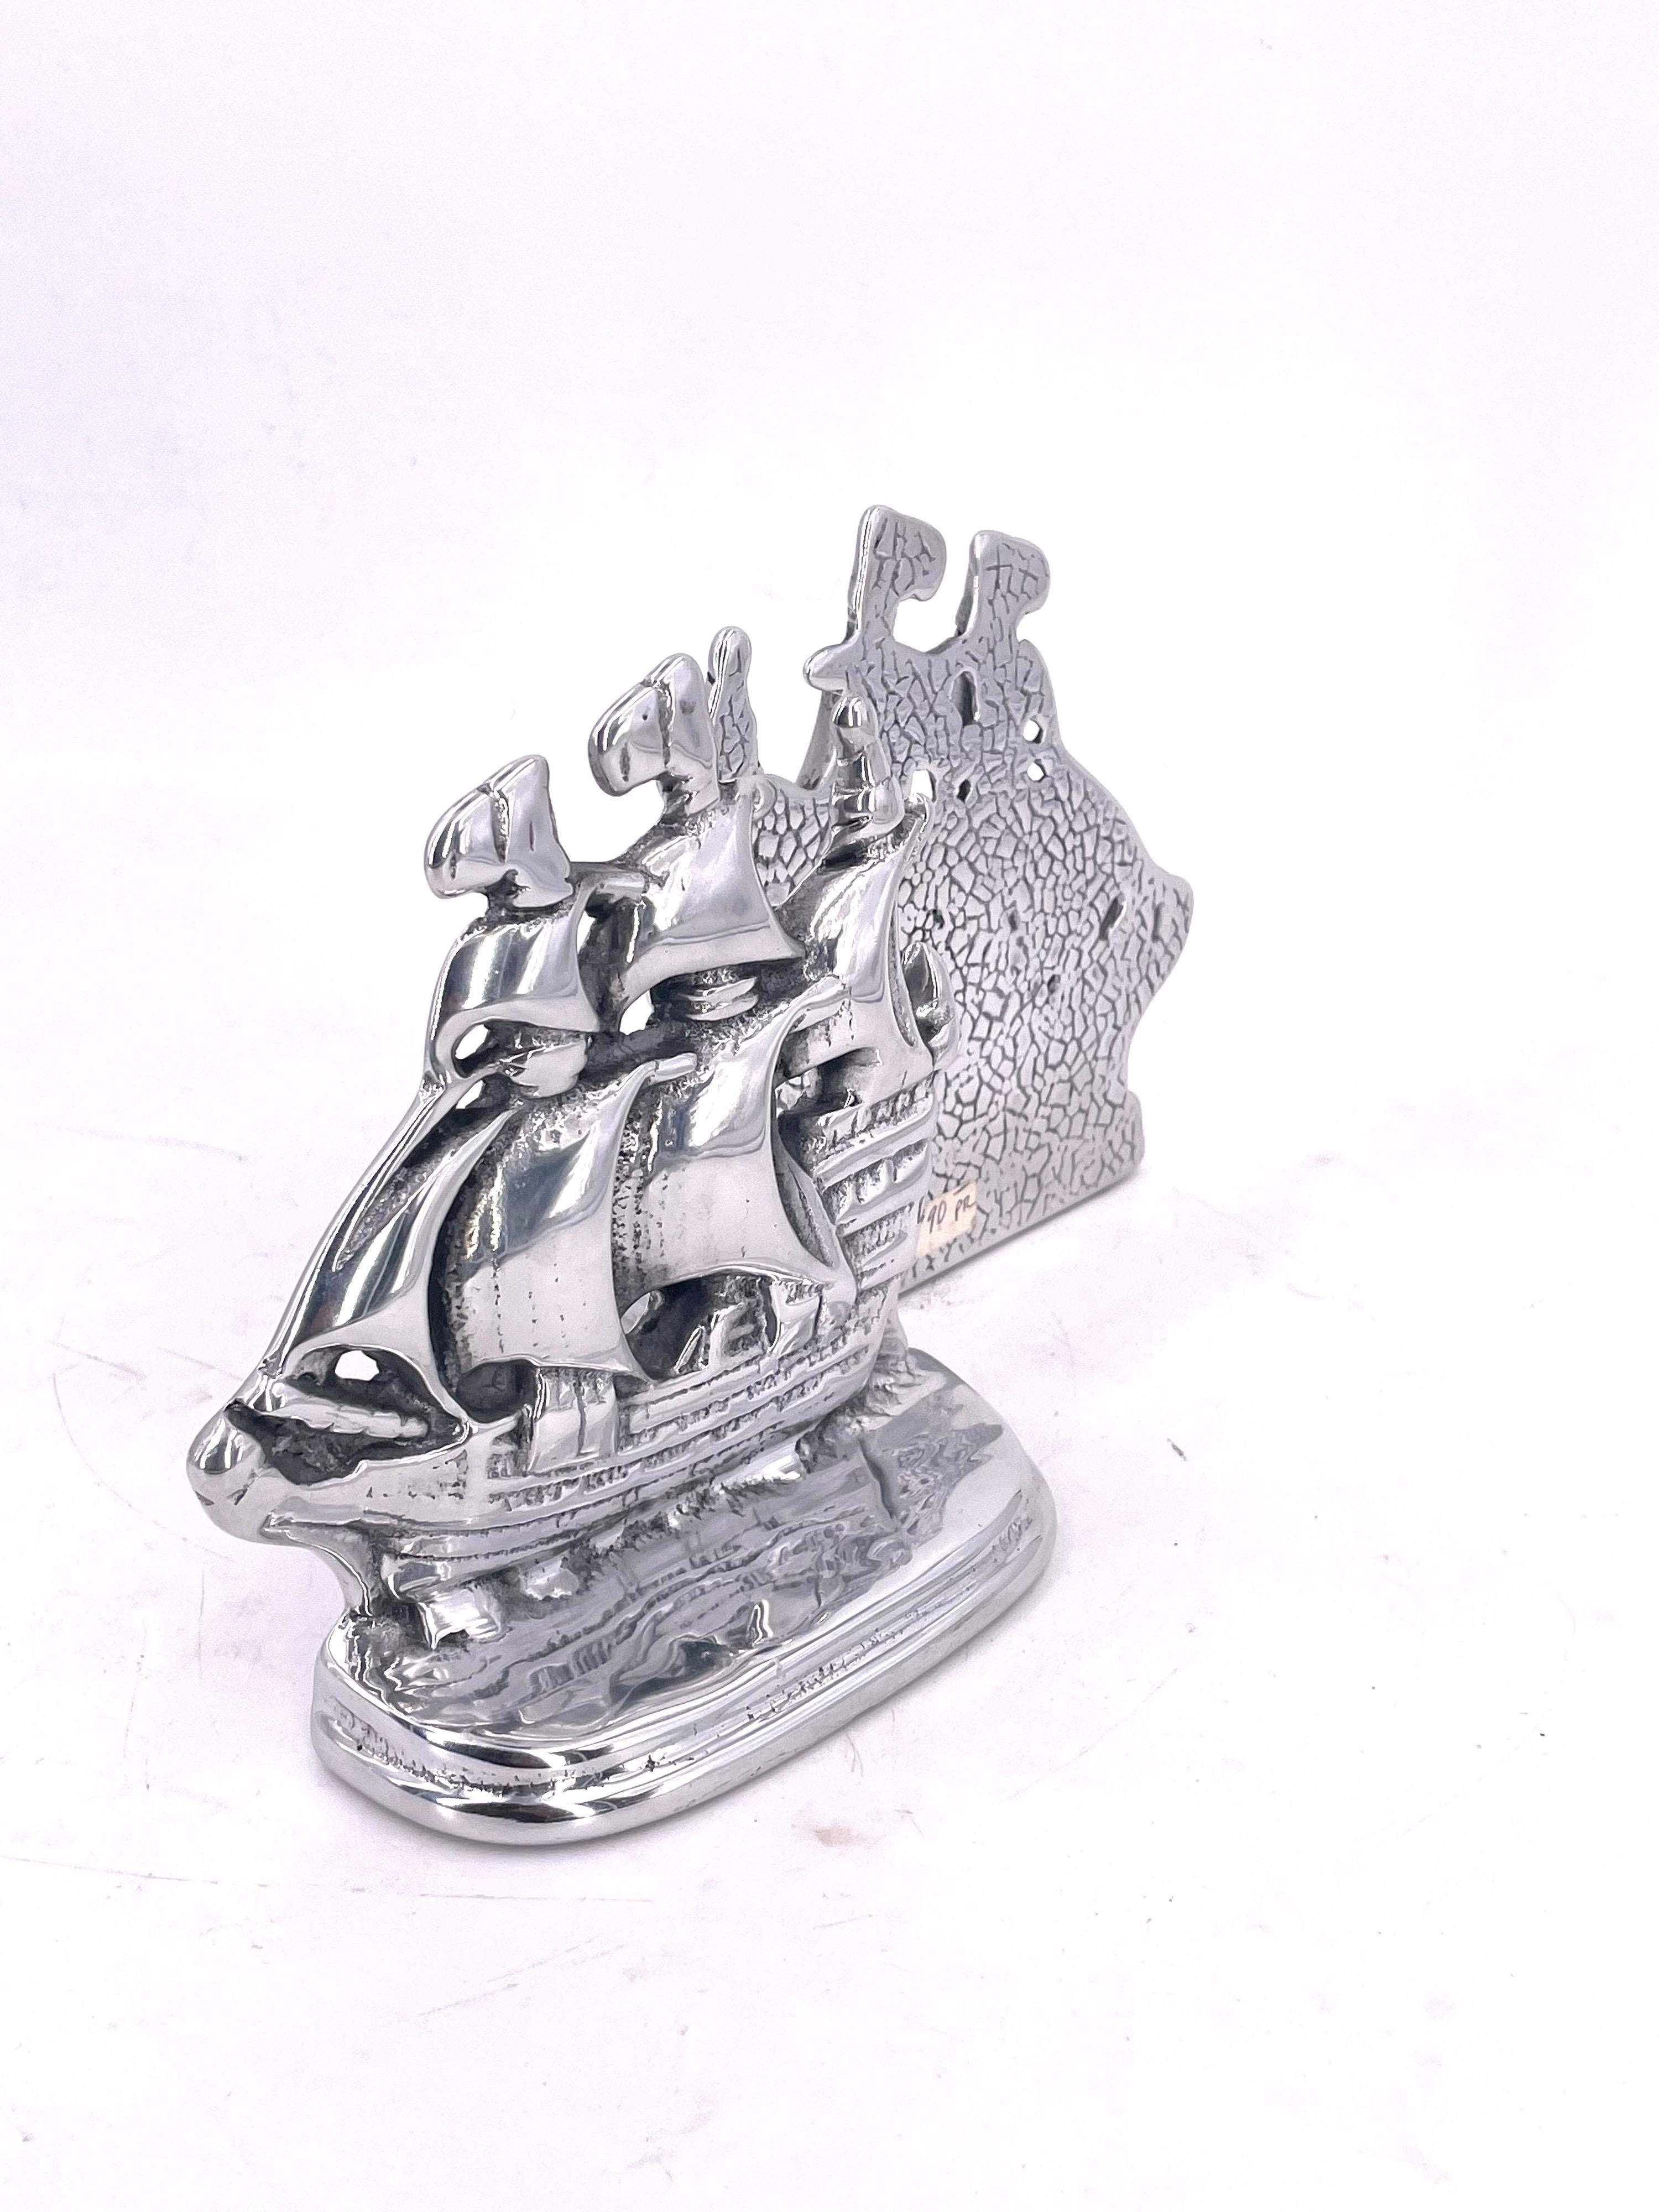 Polished aluminum rare Spanish galleon ships sculpture by Hosleton signed, and numbered made in Canada circa 1970s.